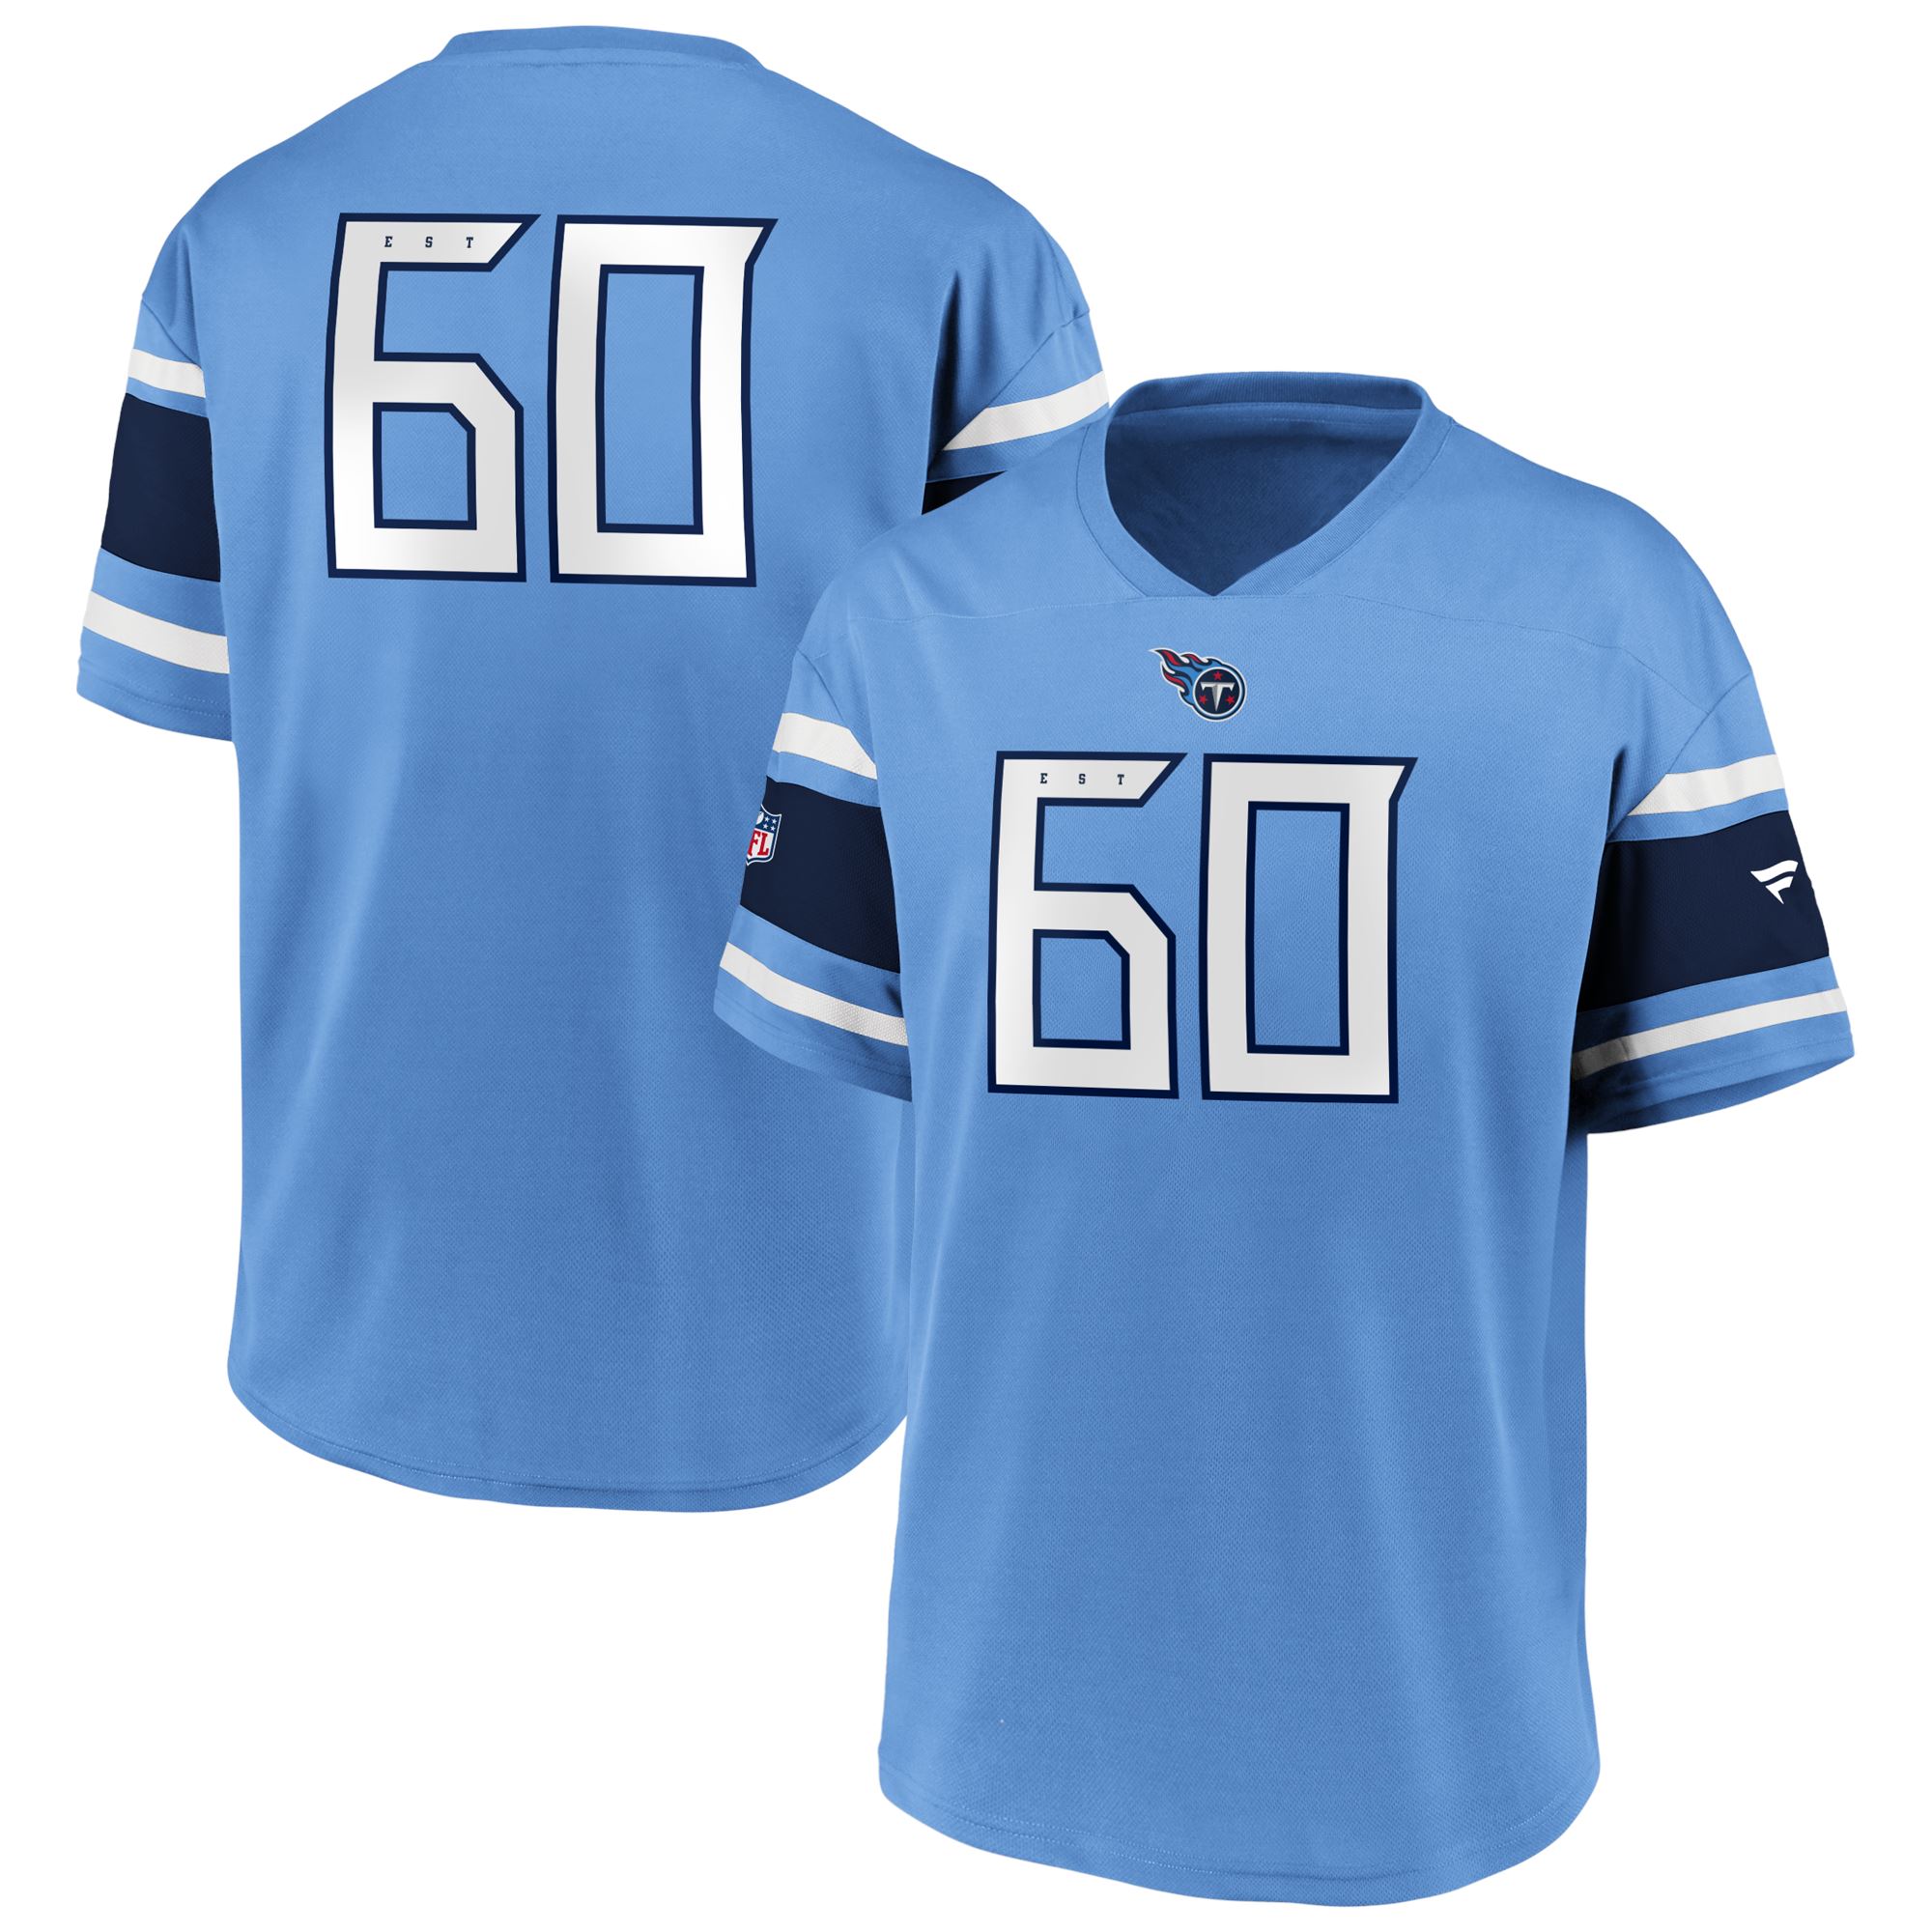 Tennessee Titans NFL Supporters Jersey Fanatics